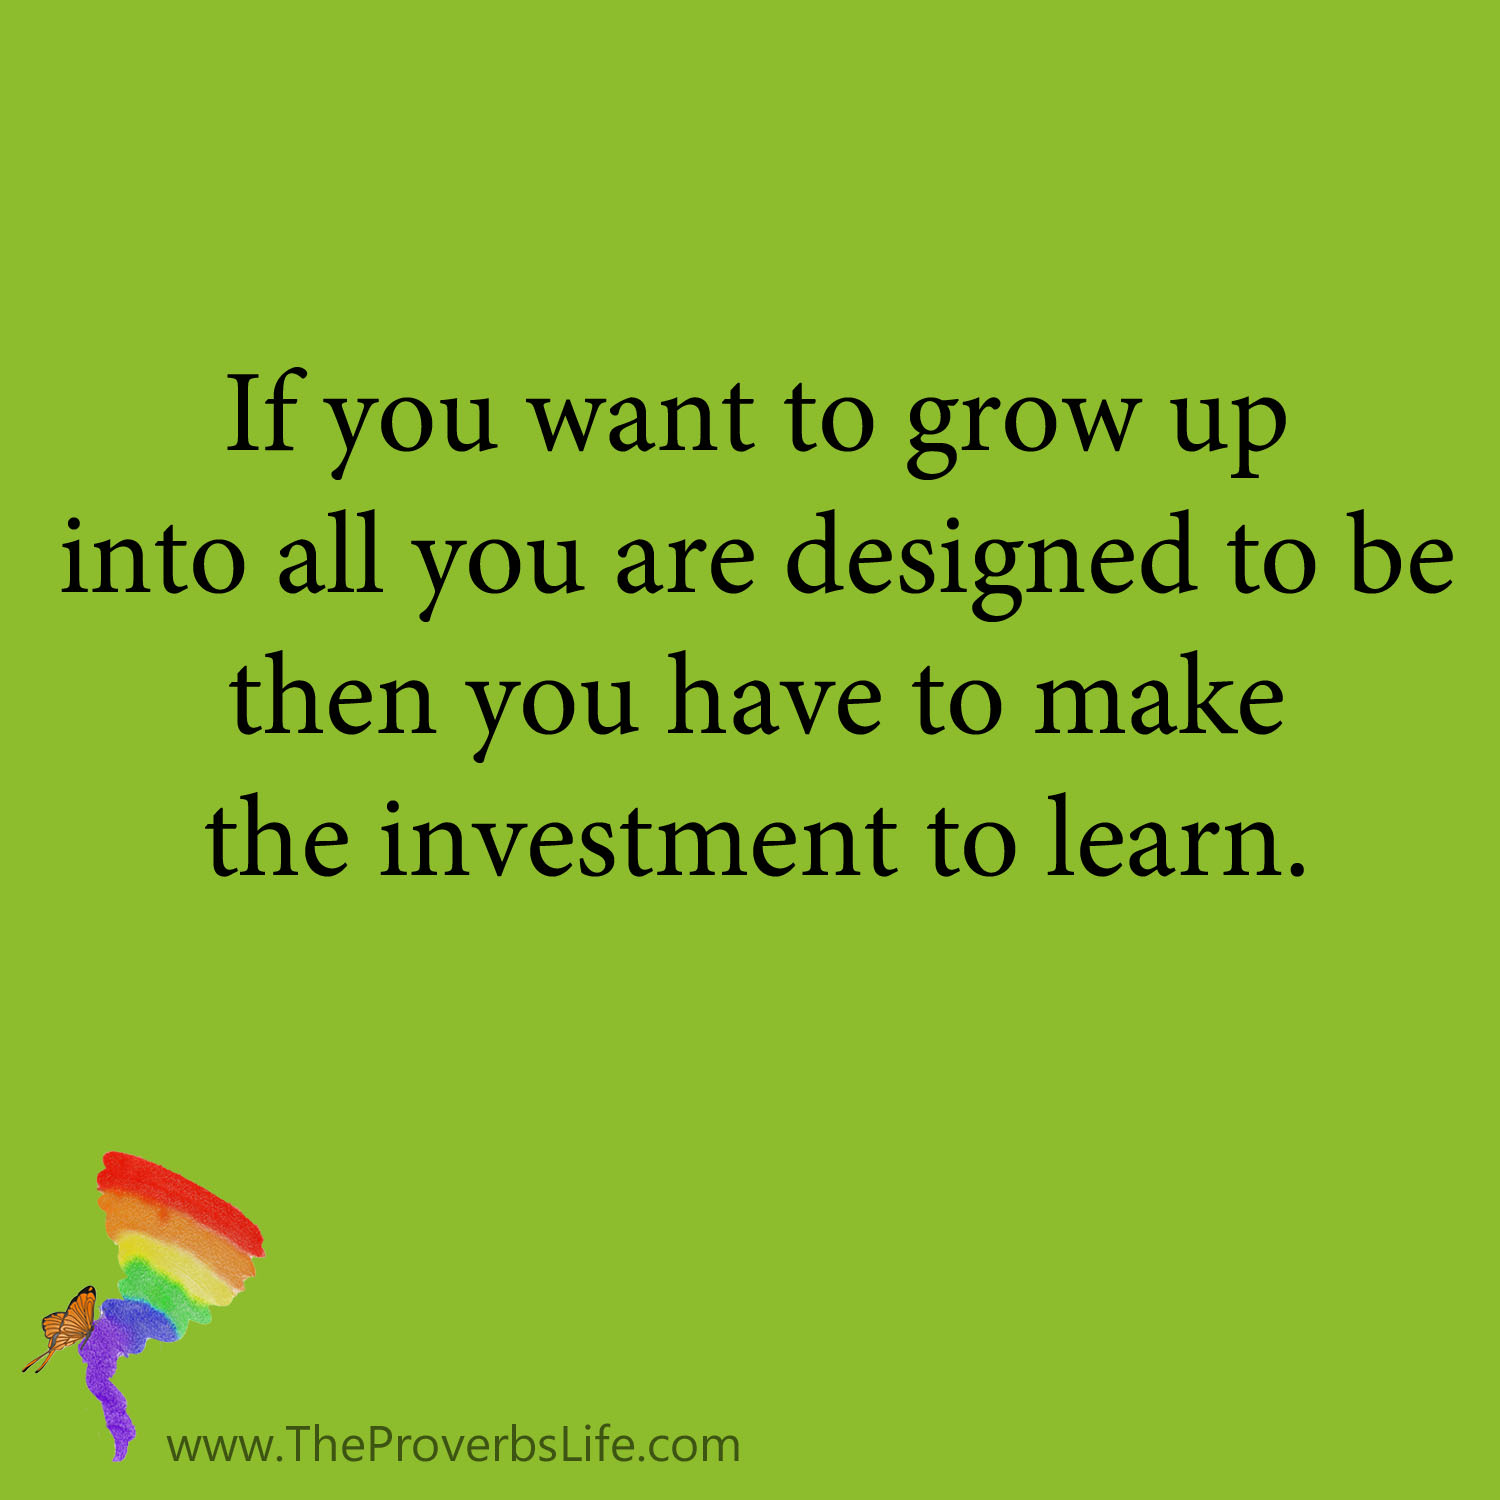 The Proverbs Life Quote - investment in learning